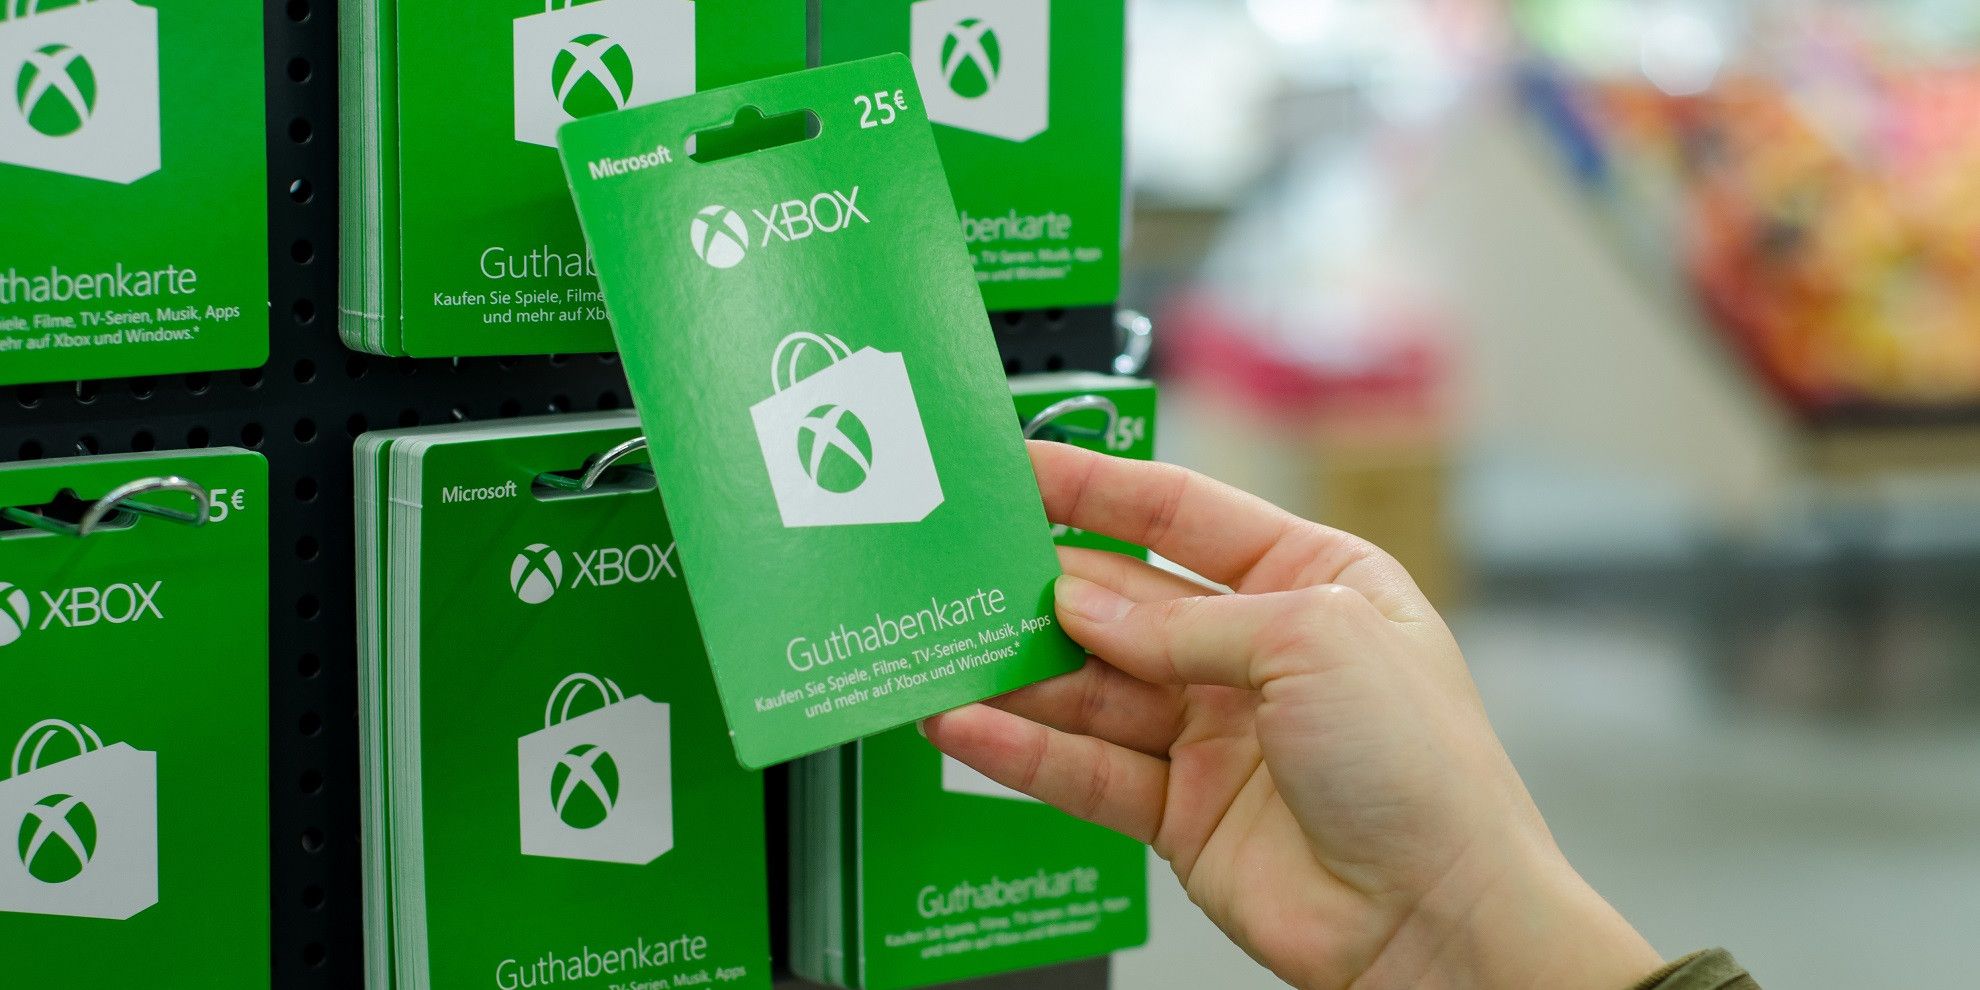 Has anyone found success with earning the Xbox gift cards by using